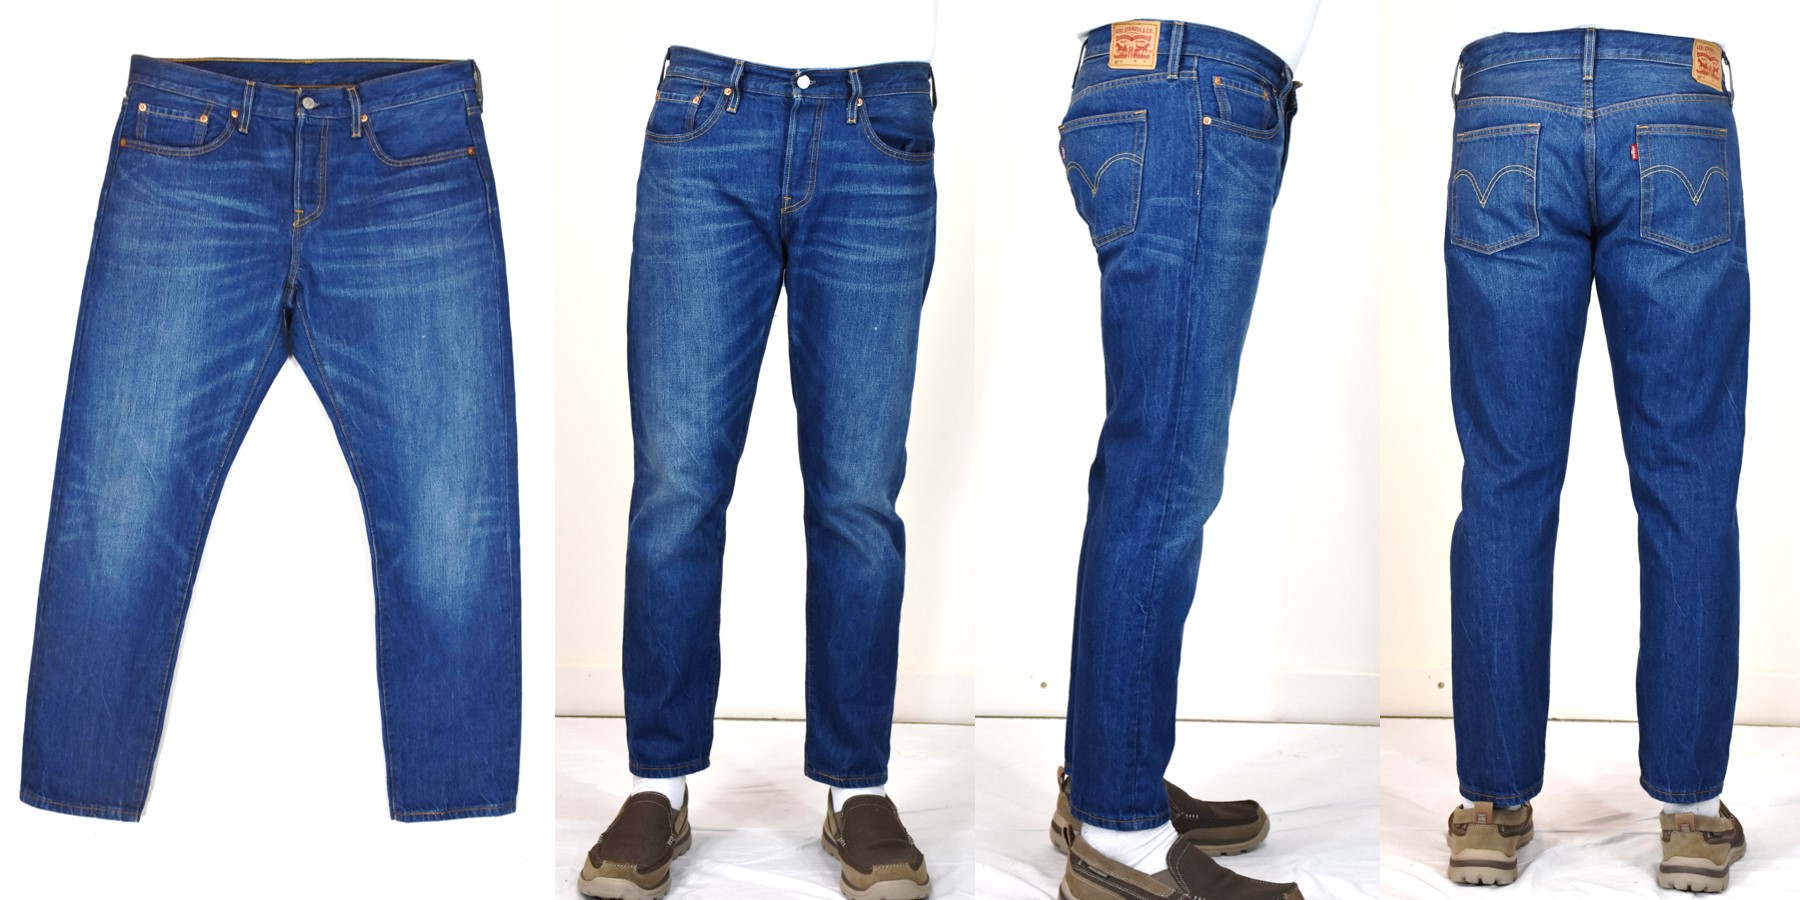 Are Levi's Jeans Unisex? - THE JEANS BLOG